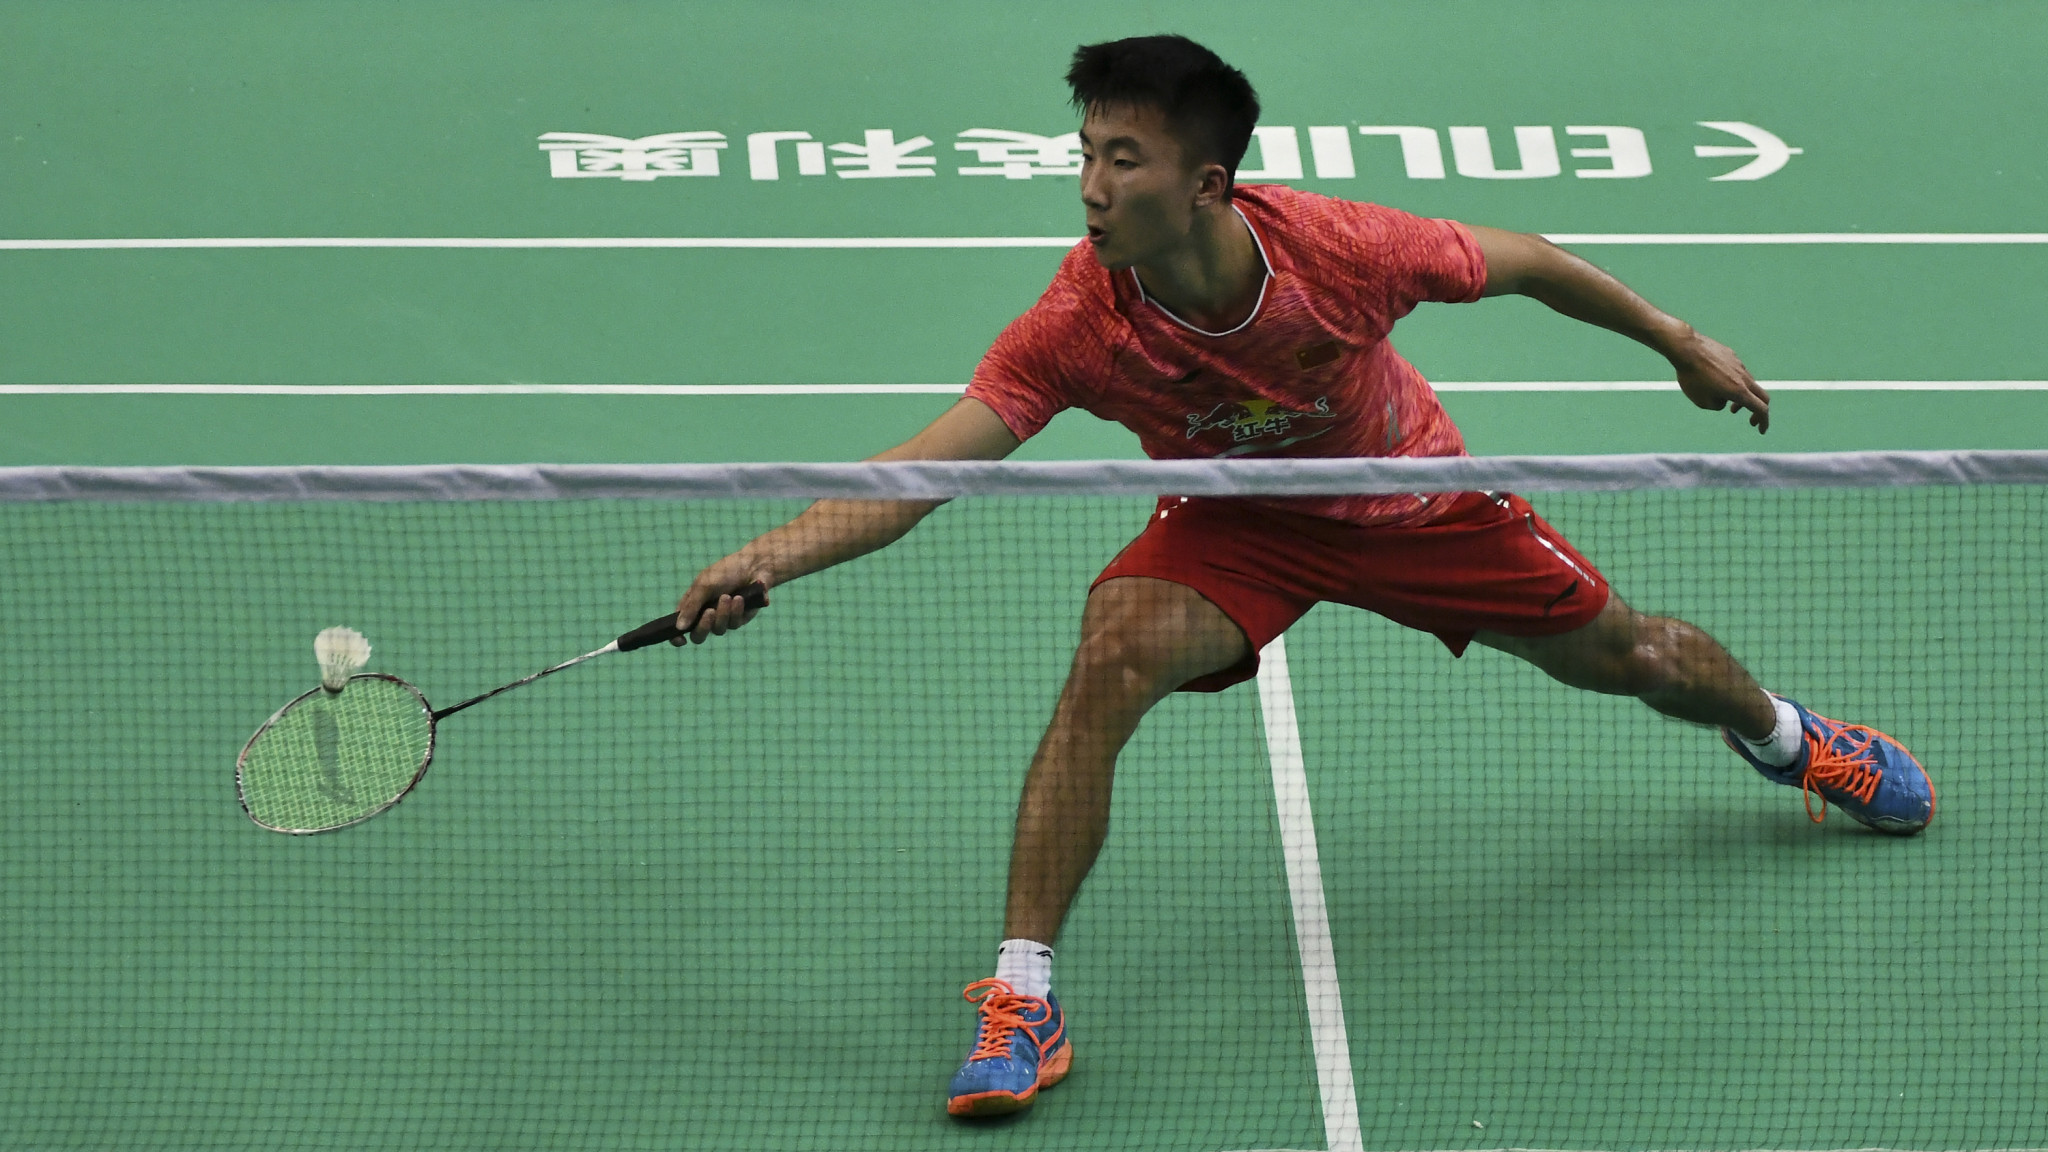 Qualifying wins give China's Sun Feixiang meeting with eighth seed Liew at BWF Australian Open